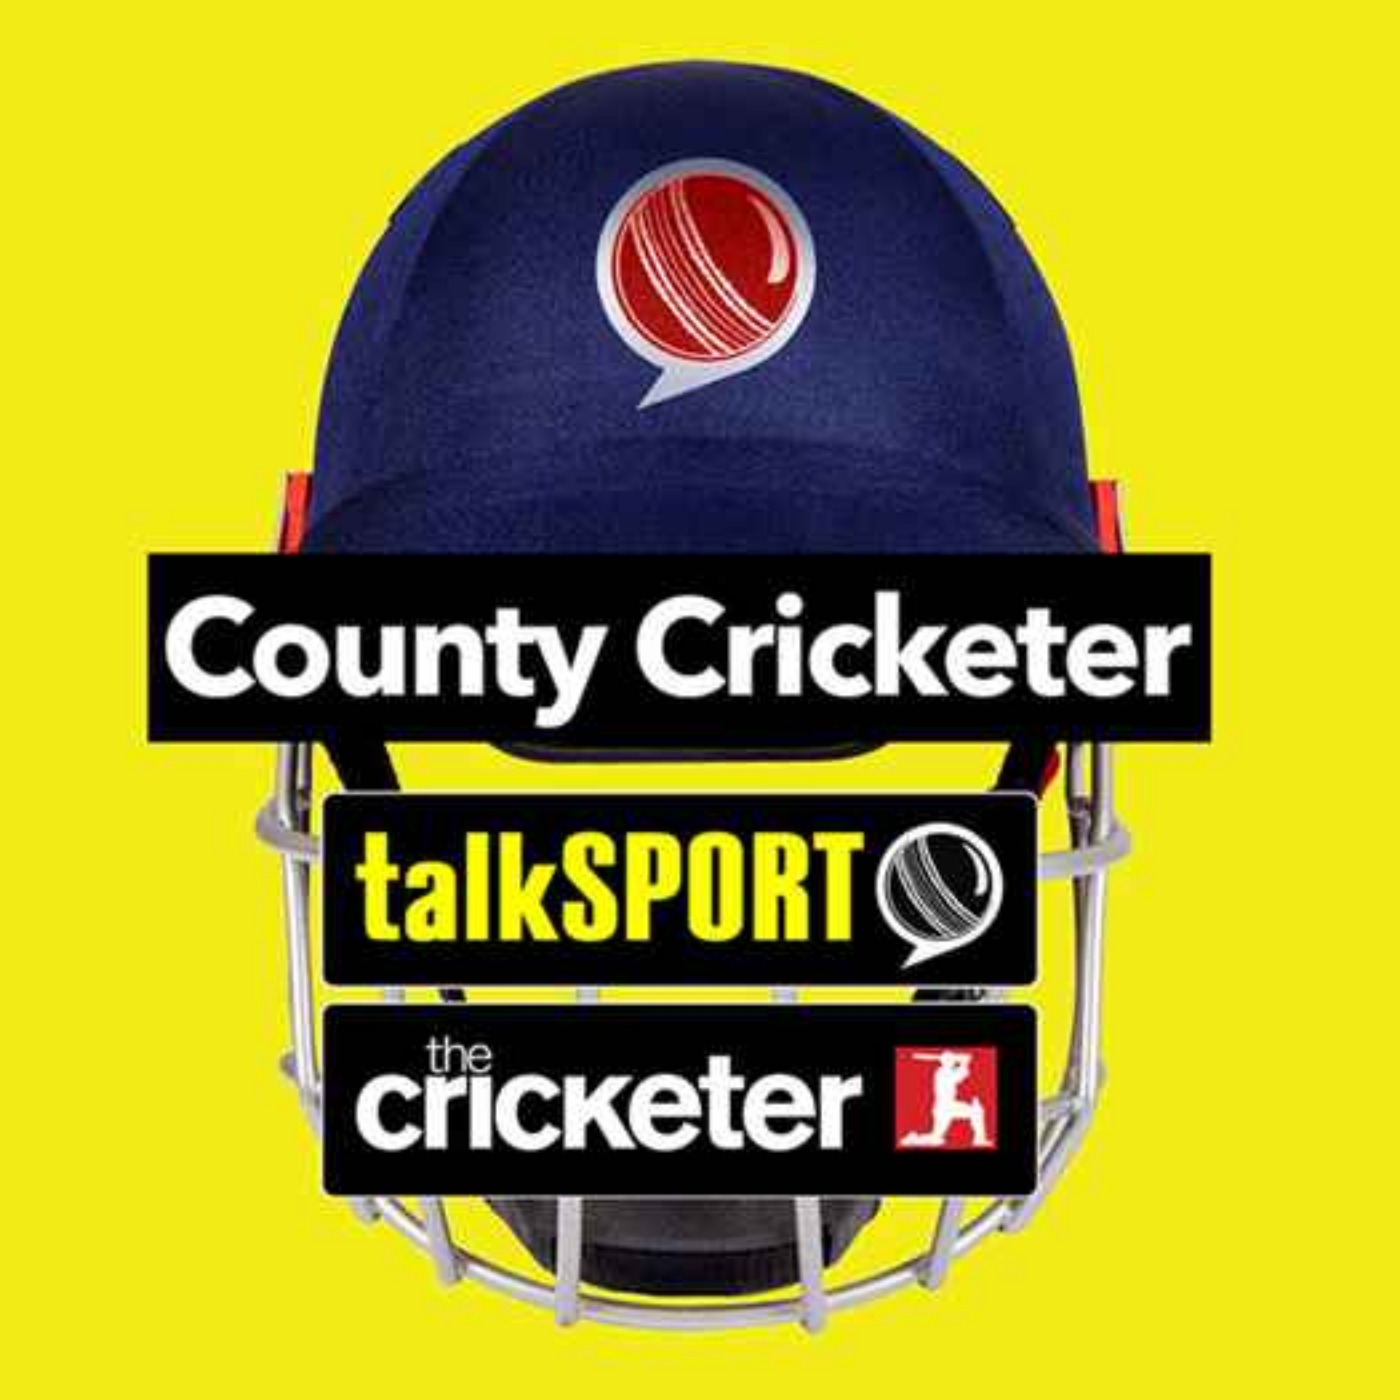 Following On: County Cricketer S2 EP11: Surrey's Record Run Chase; Yorkshire Back To Form & Ashes Venues Announced!